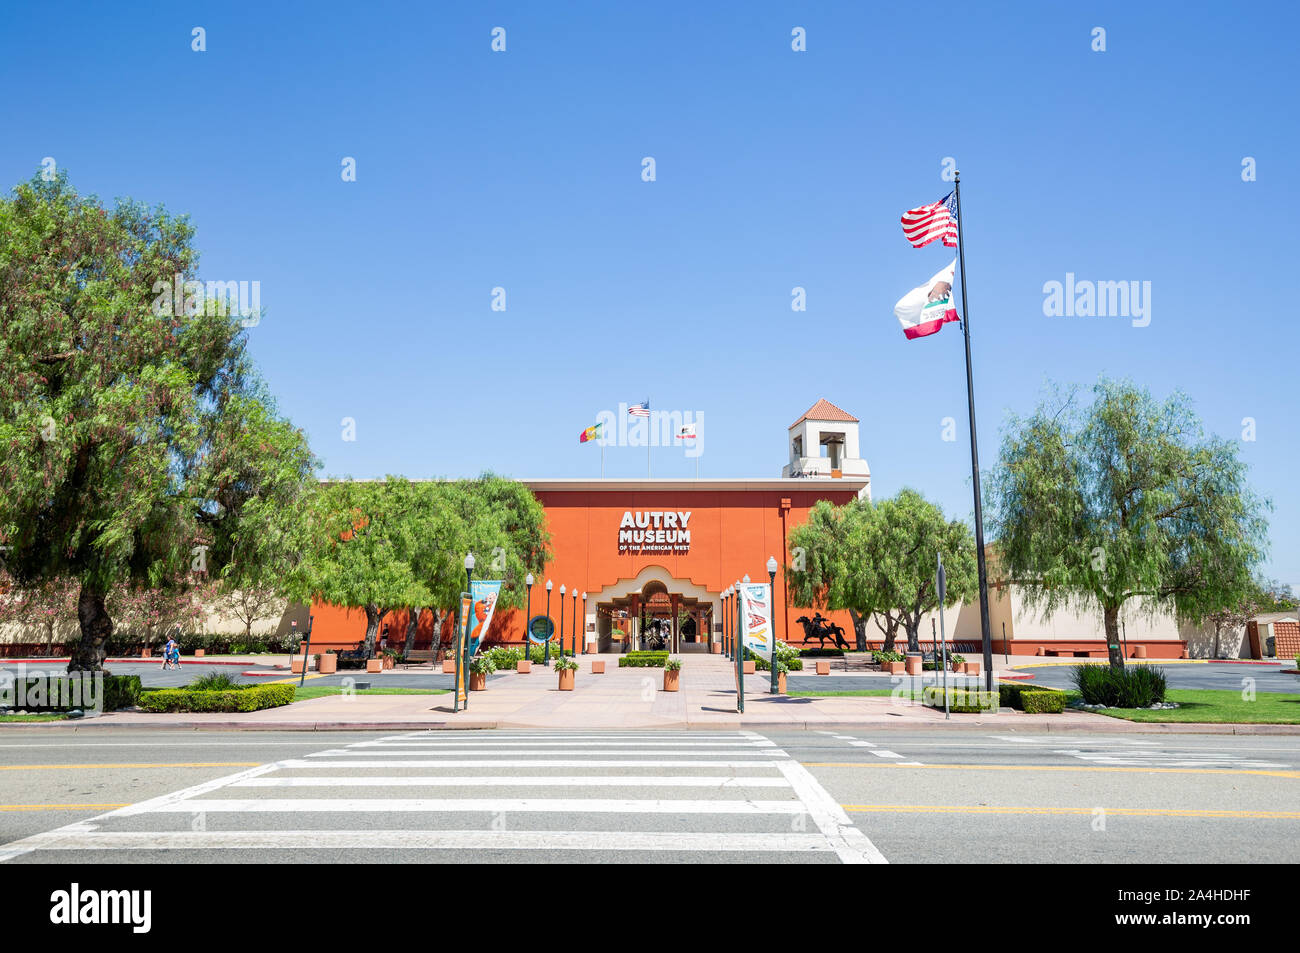 Autry Museum of the American West in Griffith Park, Los Angeles, California Stock Photo